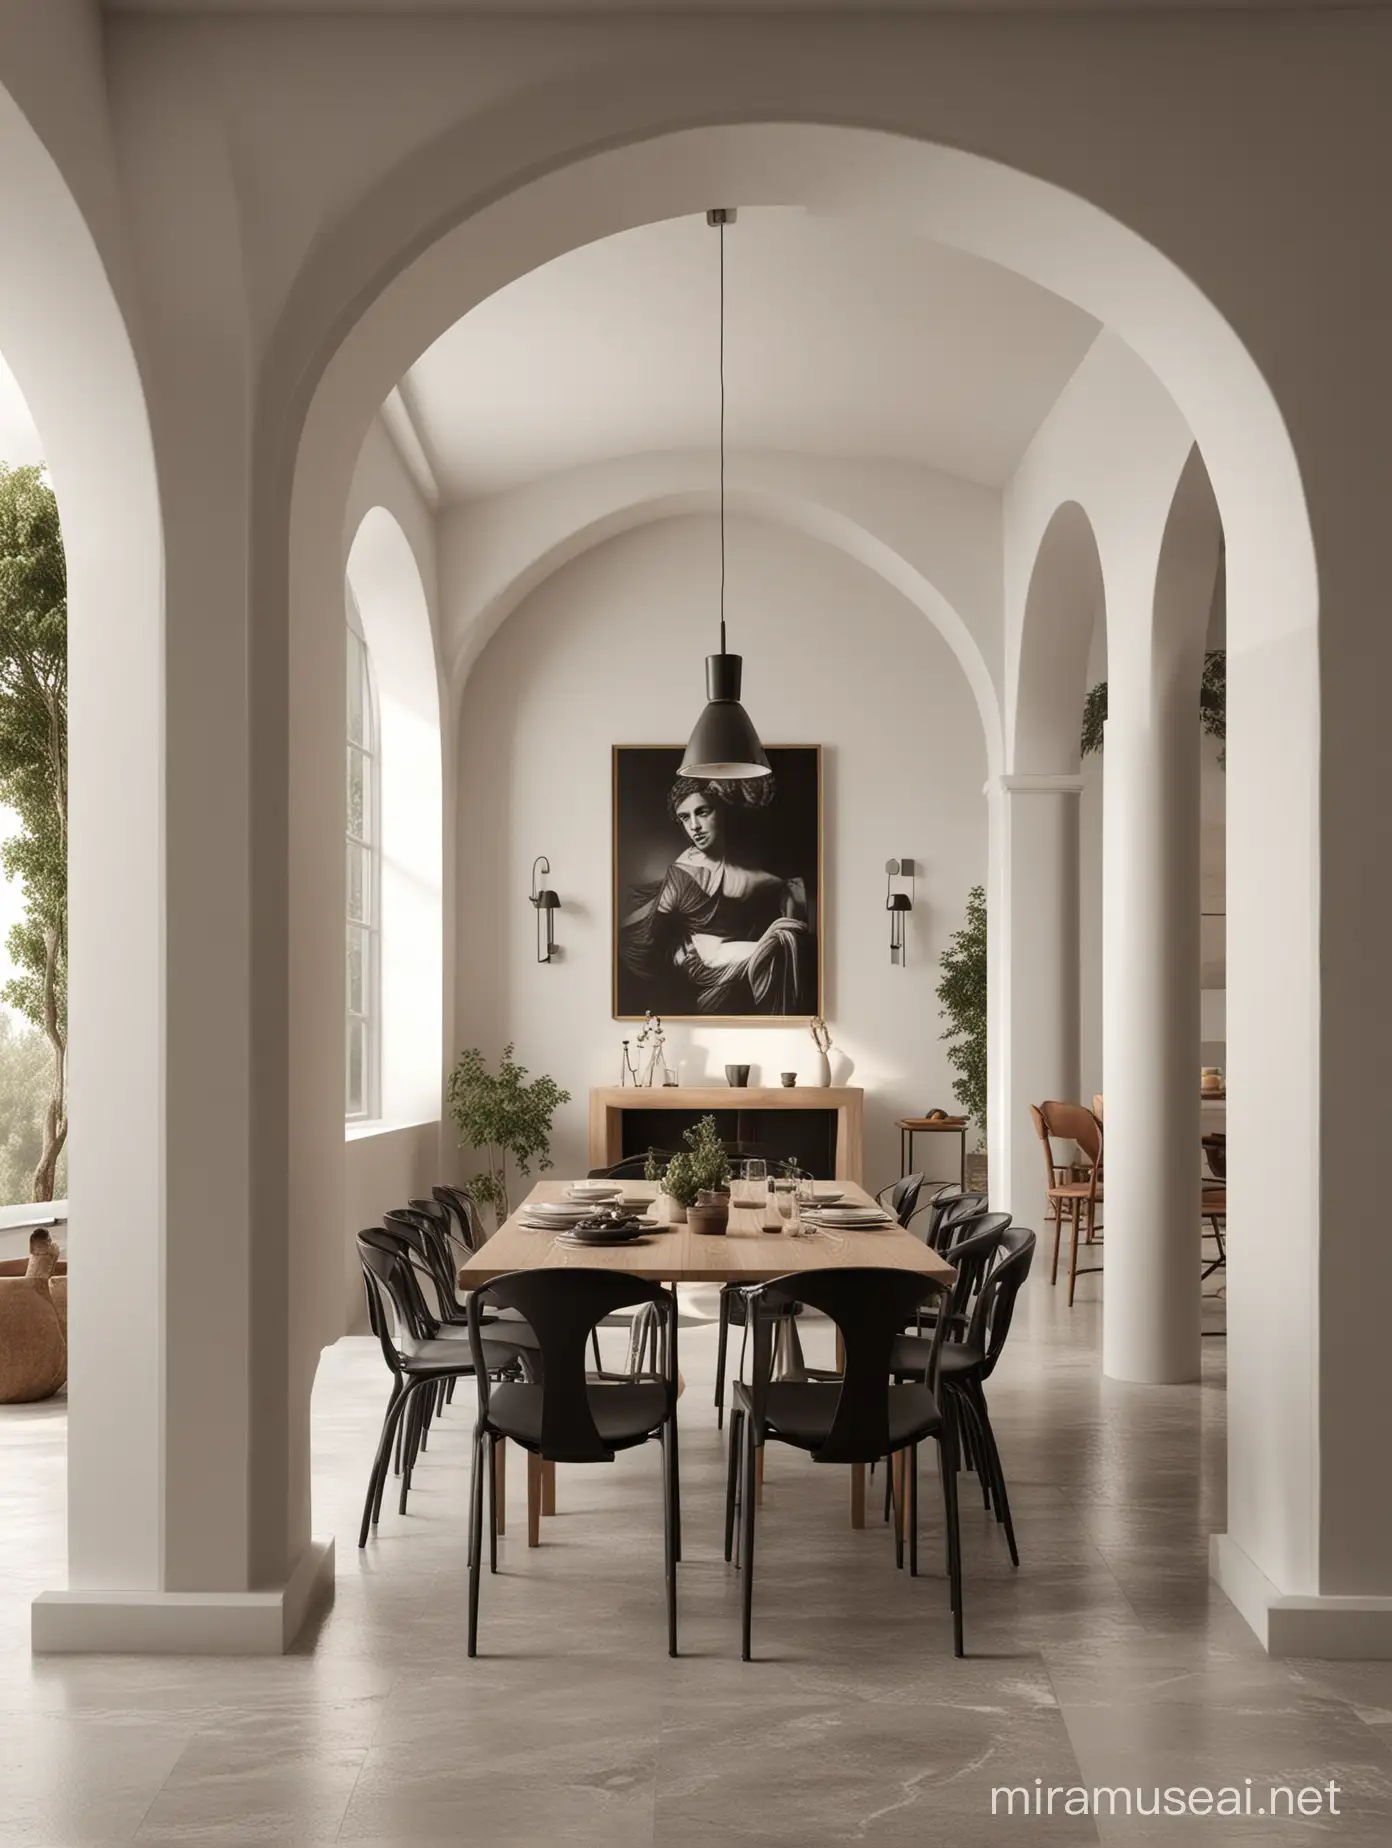 Ethereal Modern Dining Room Render Inspired by Greek and Roman Architecture